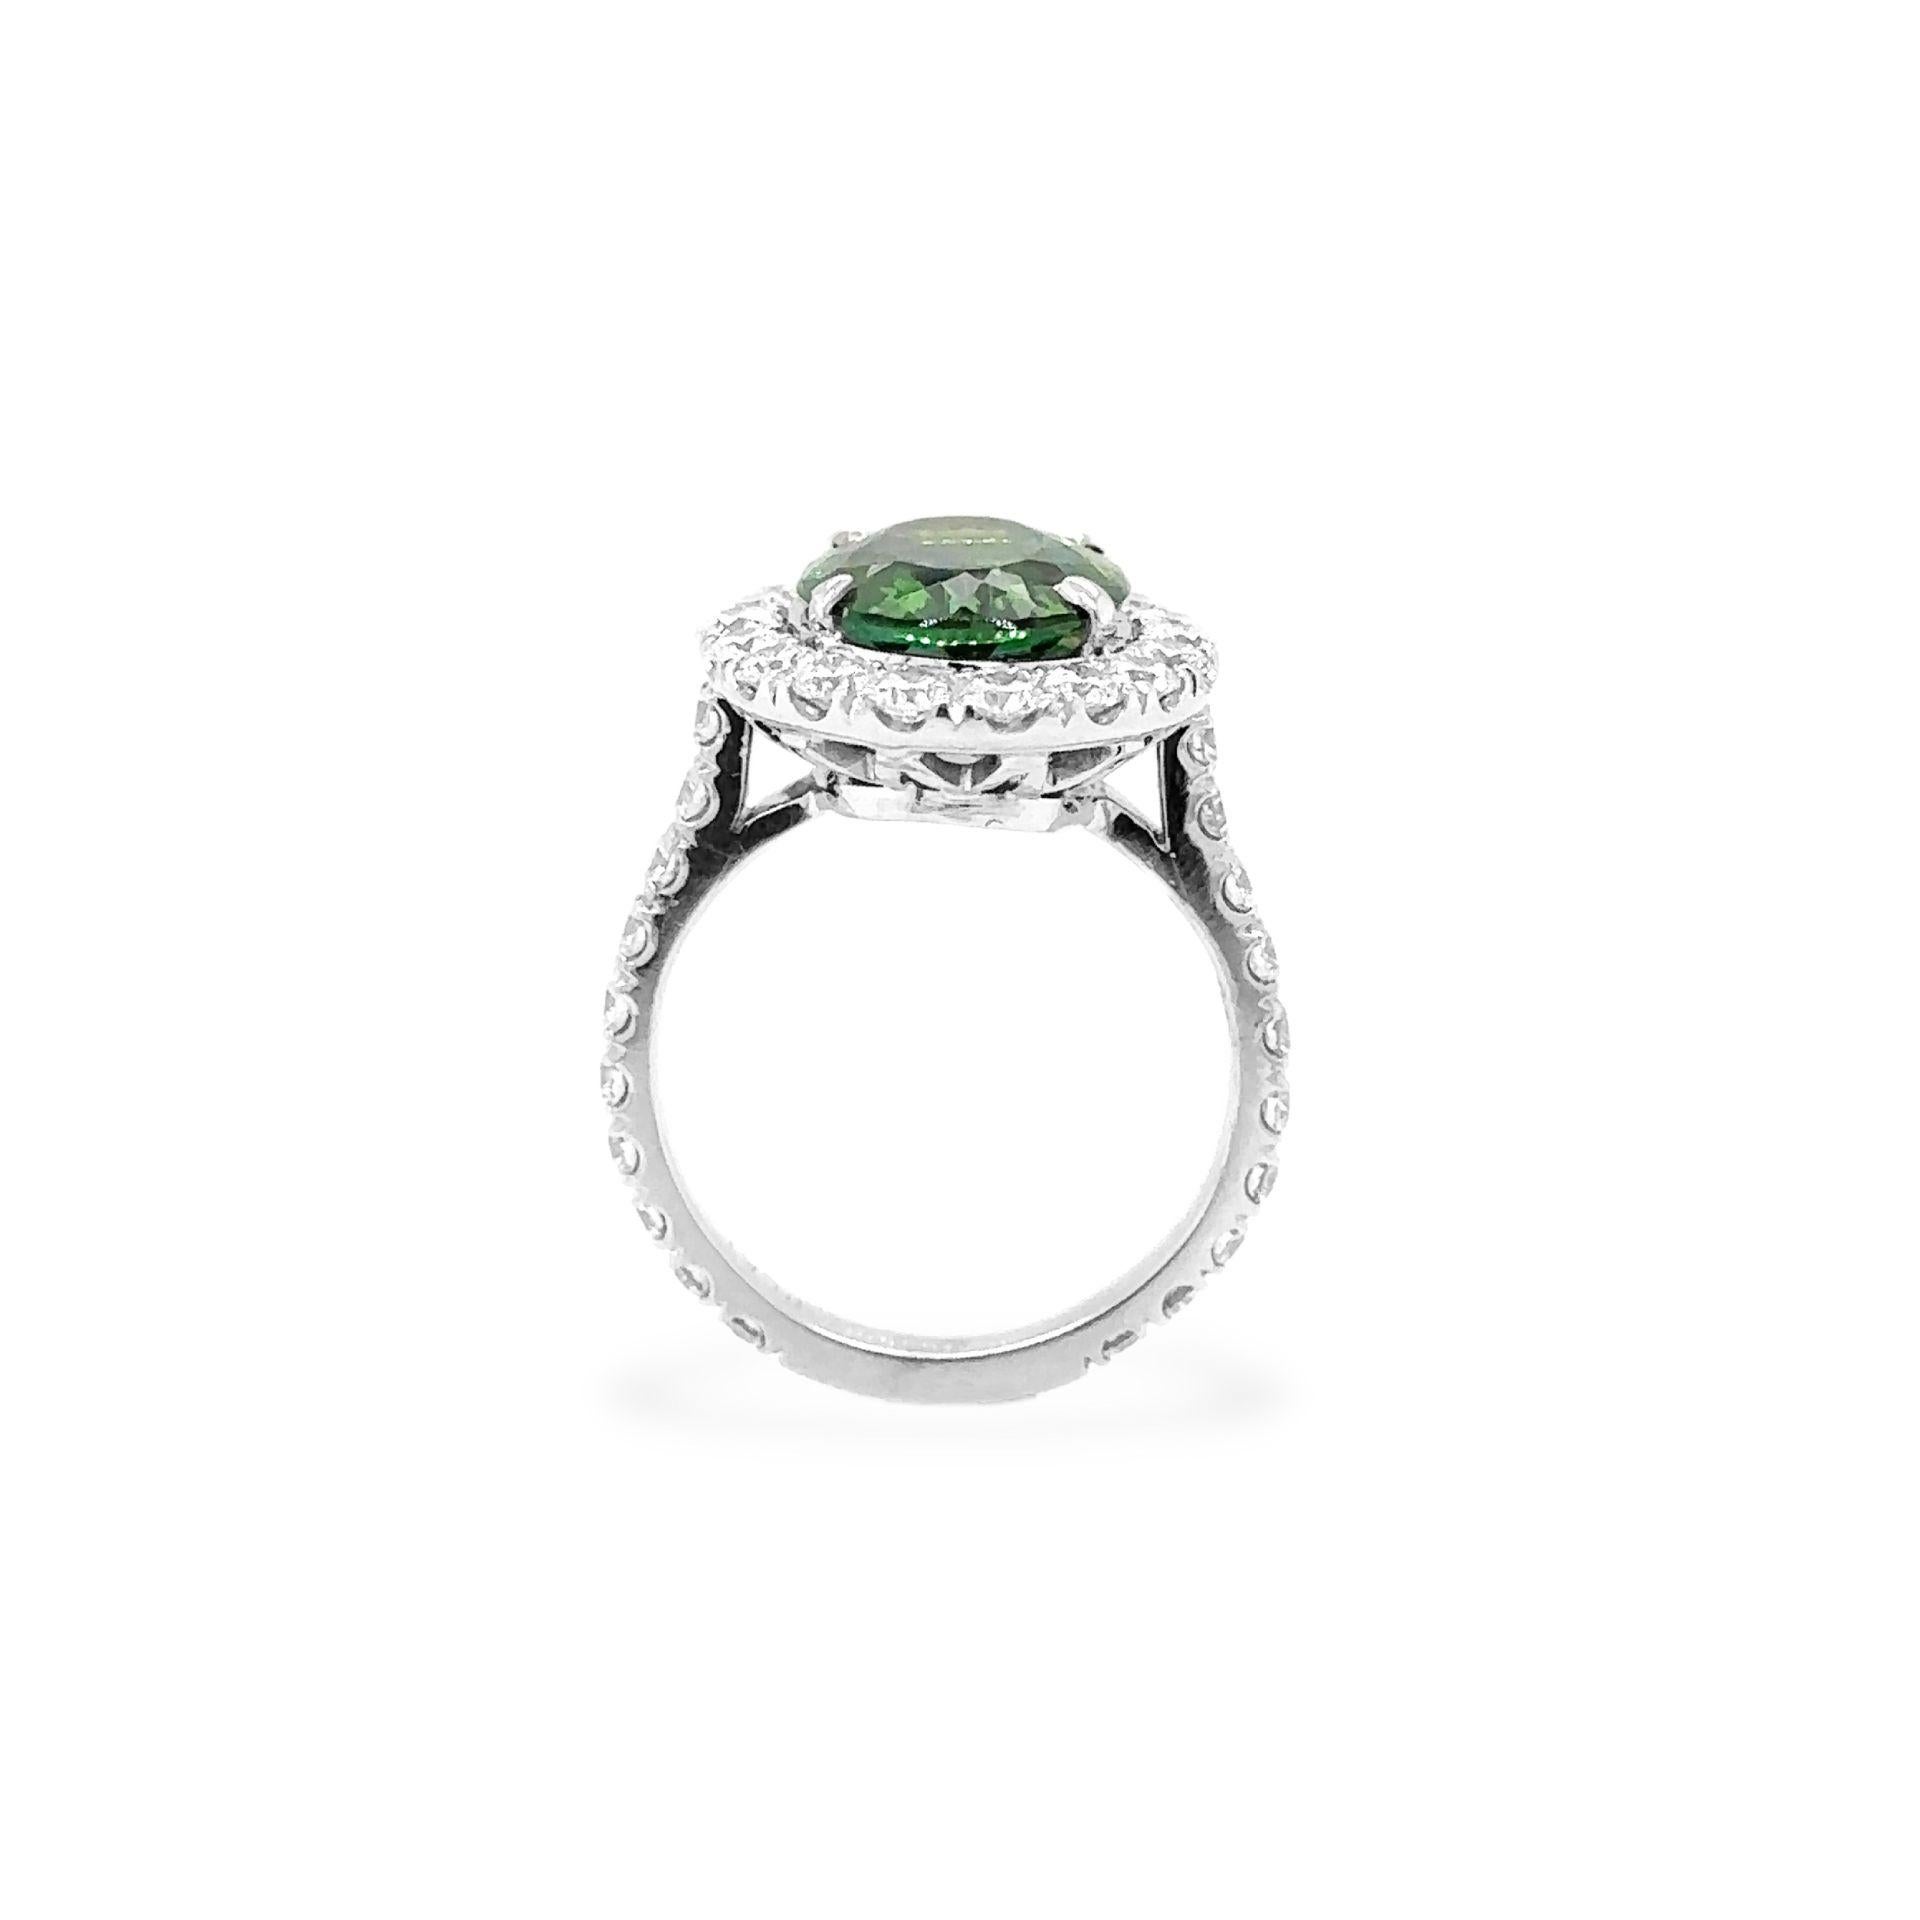 Oval Cut Oval Green Tourmaline and Diamond Ring 7.08 carats Platinum For Sale